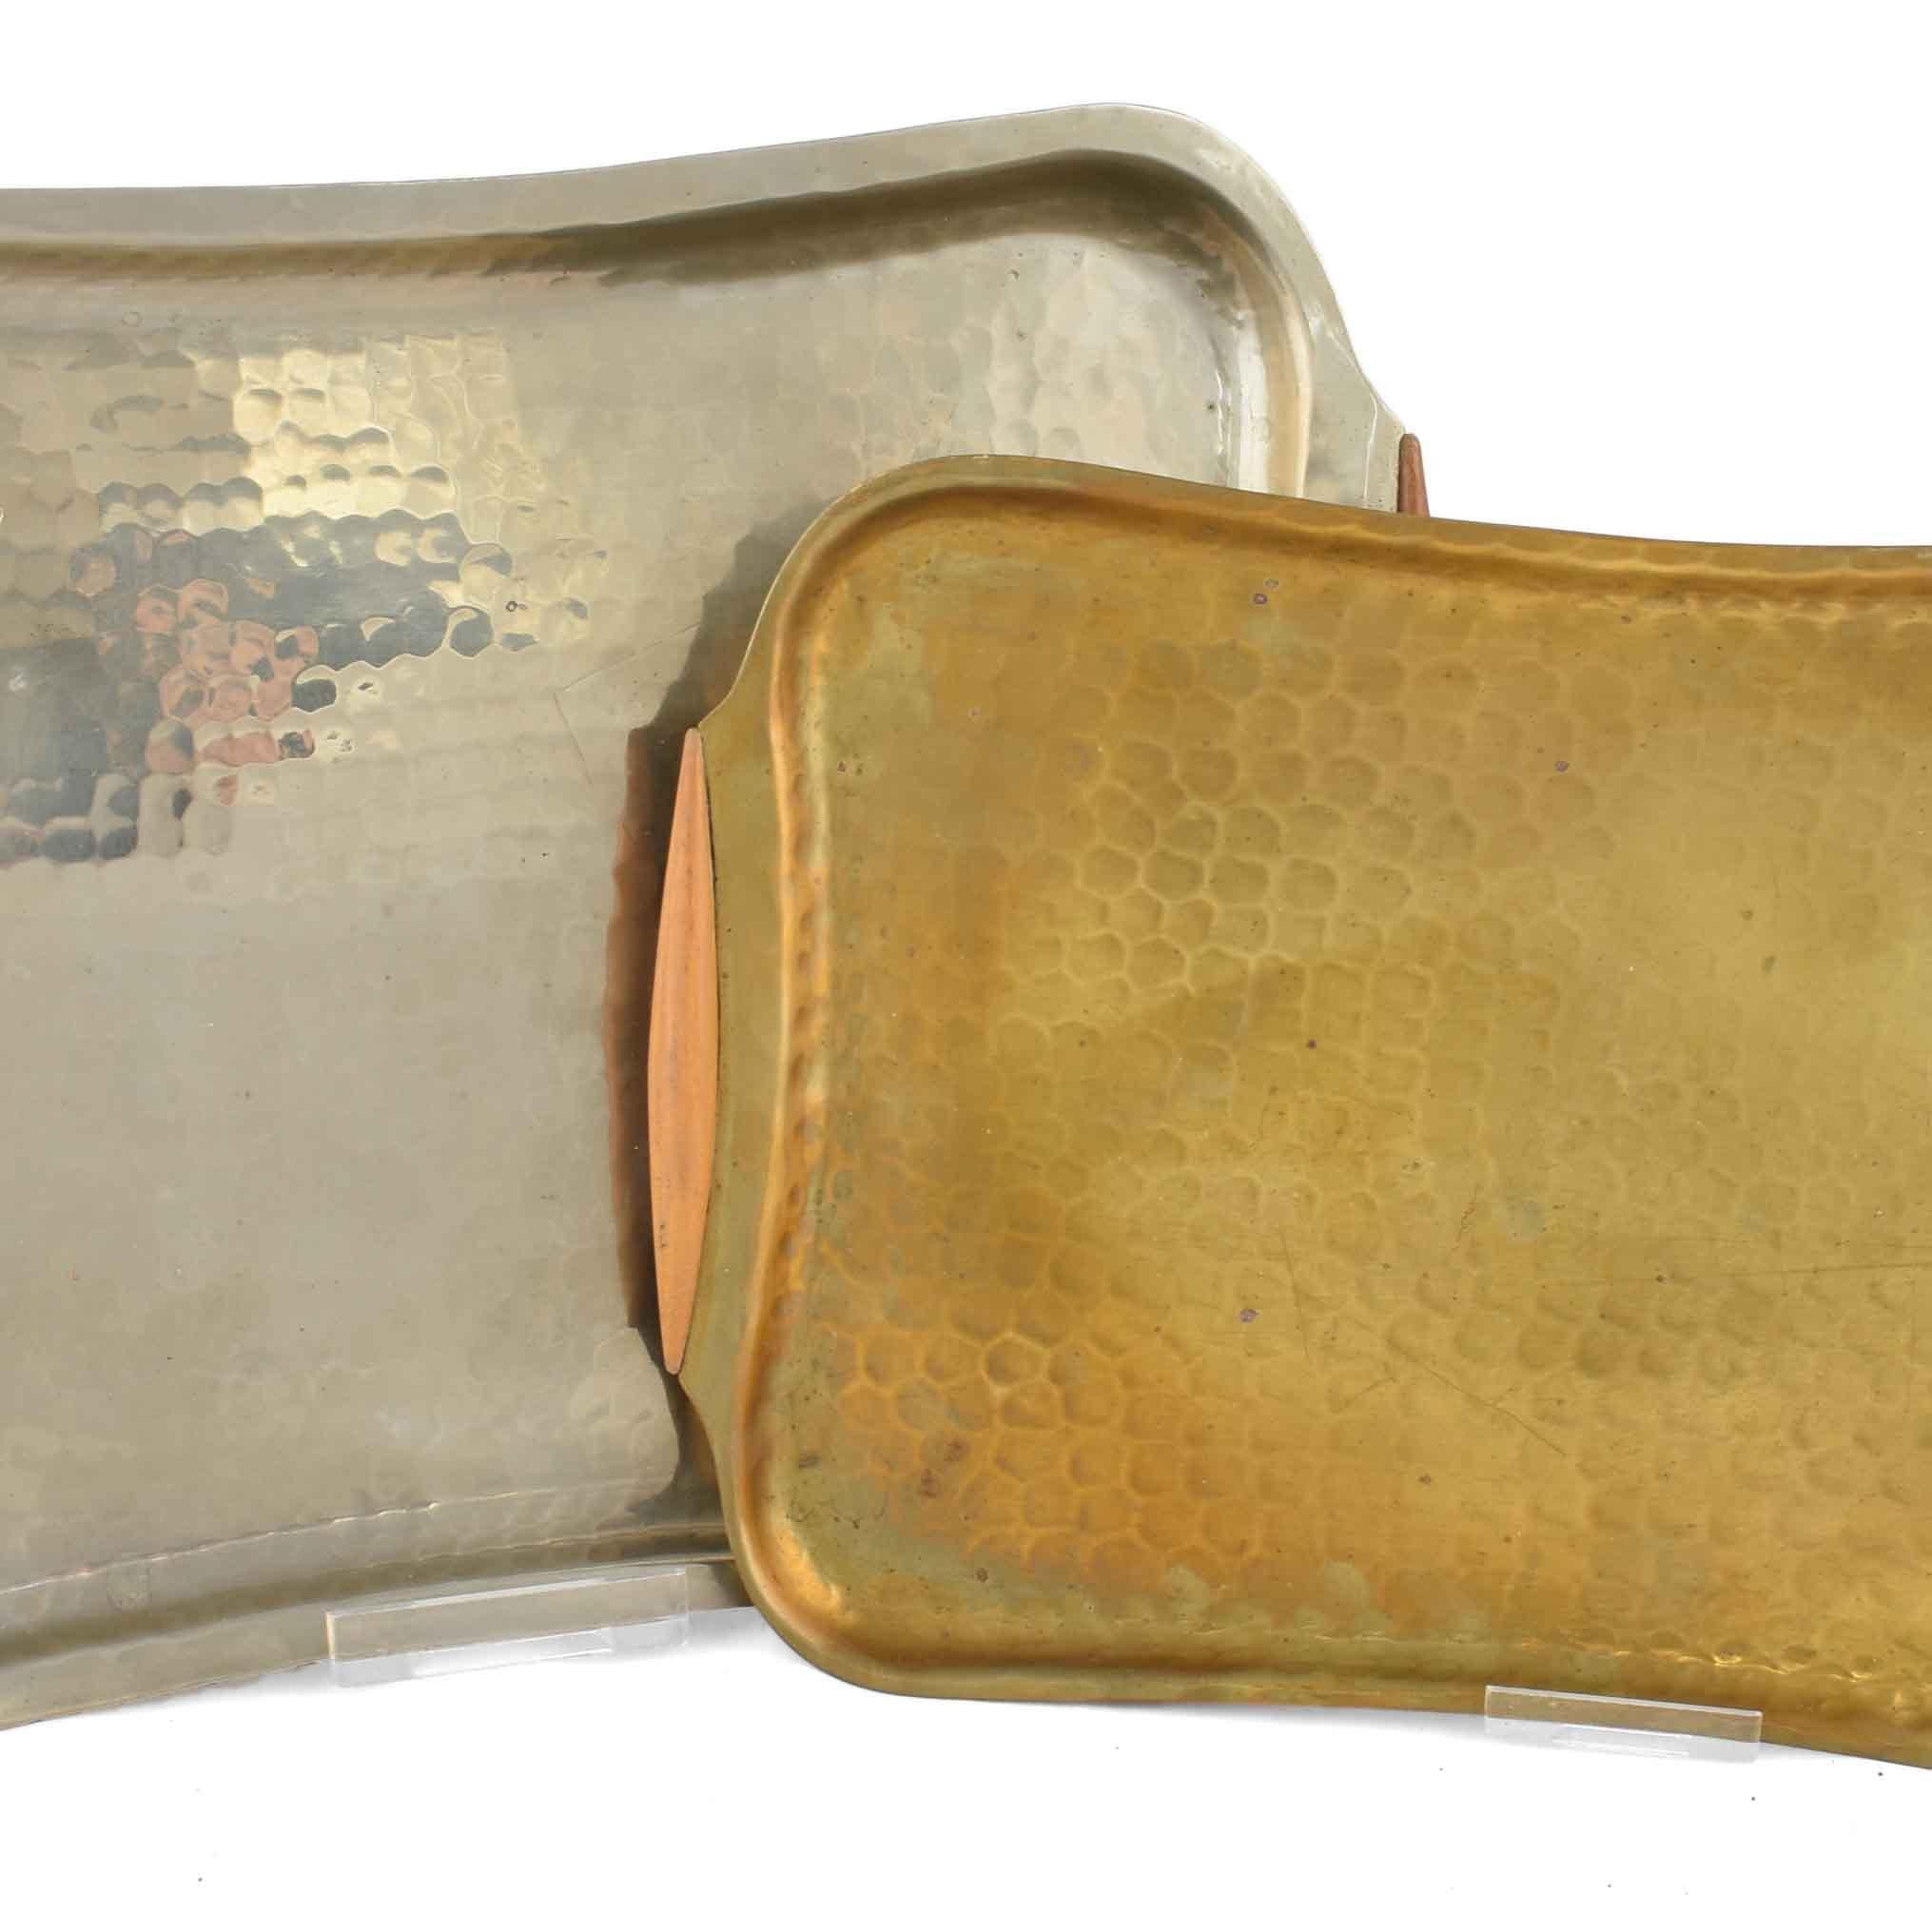 Two trays is an original pair of objects realized by Eugen Zint in the 1950s. 

Original tin and brass. 

The pair includes two similar trays: one brass tray and one tin tray. 

Both the objects are in very good conditions. 

Very beautiful